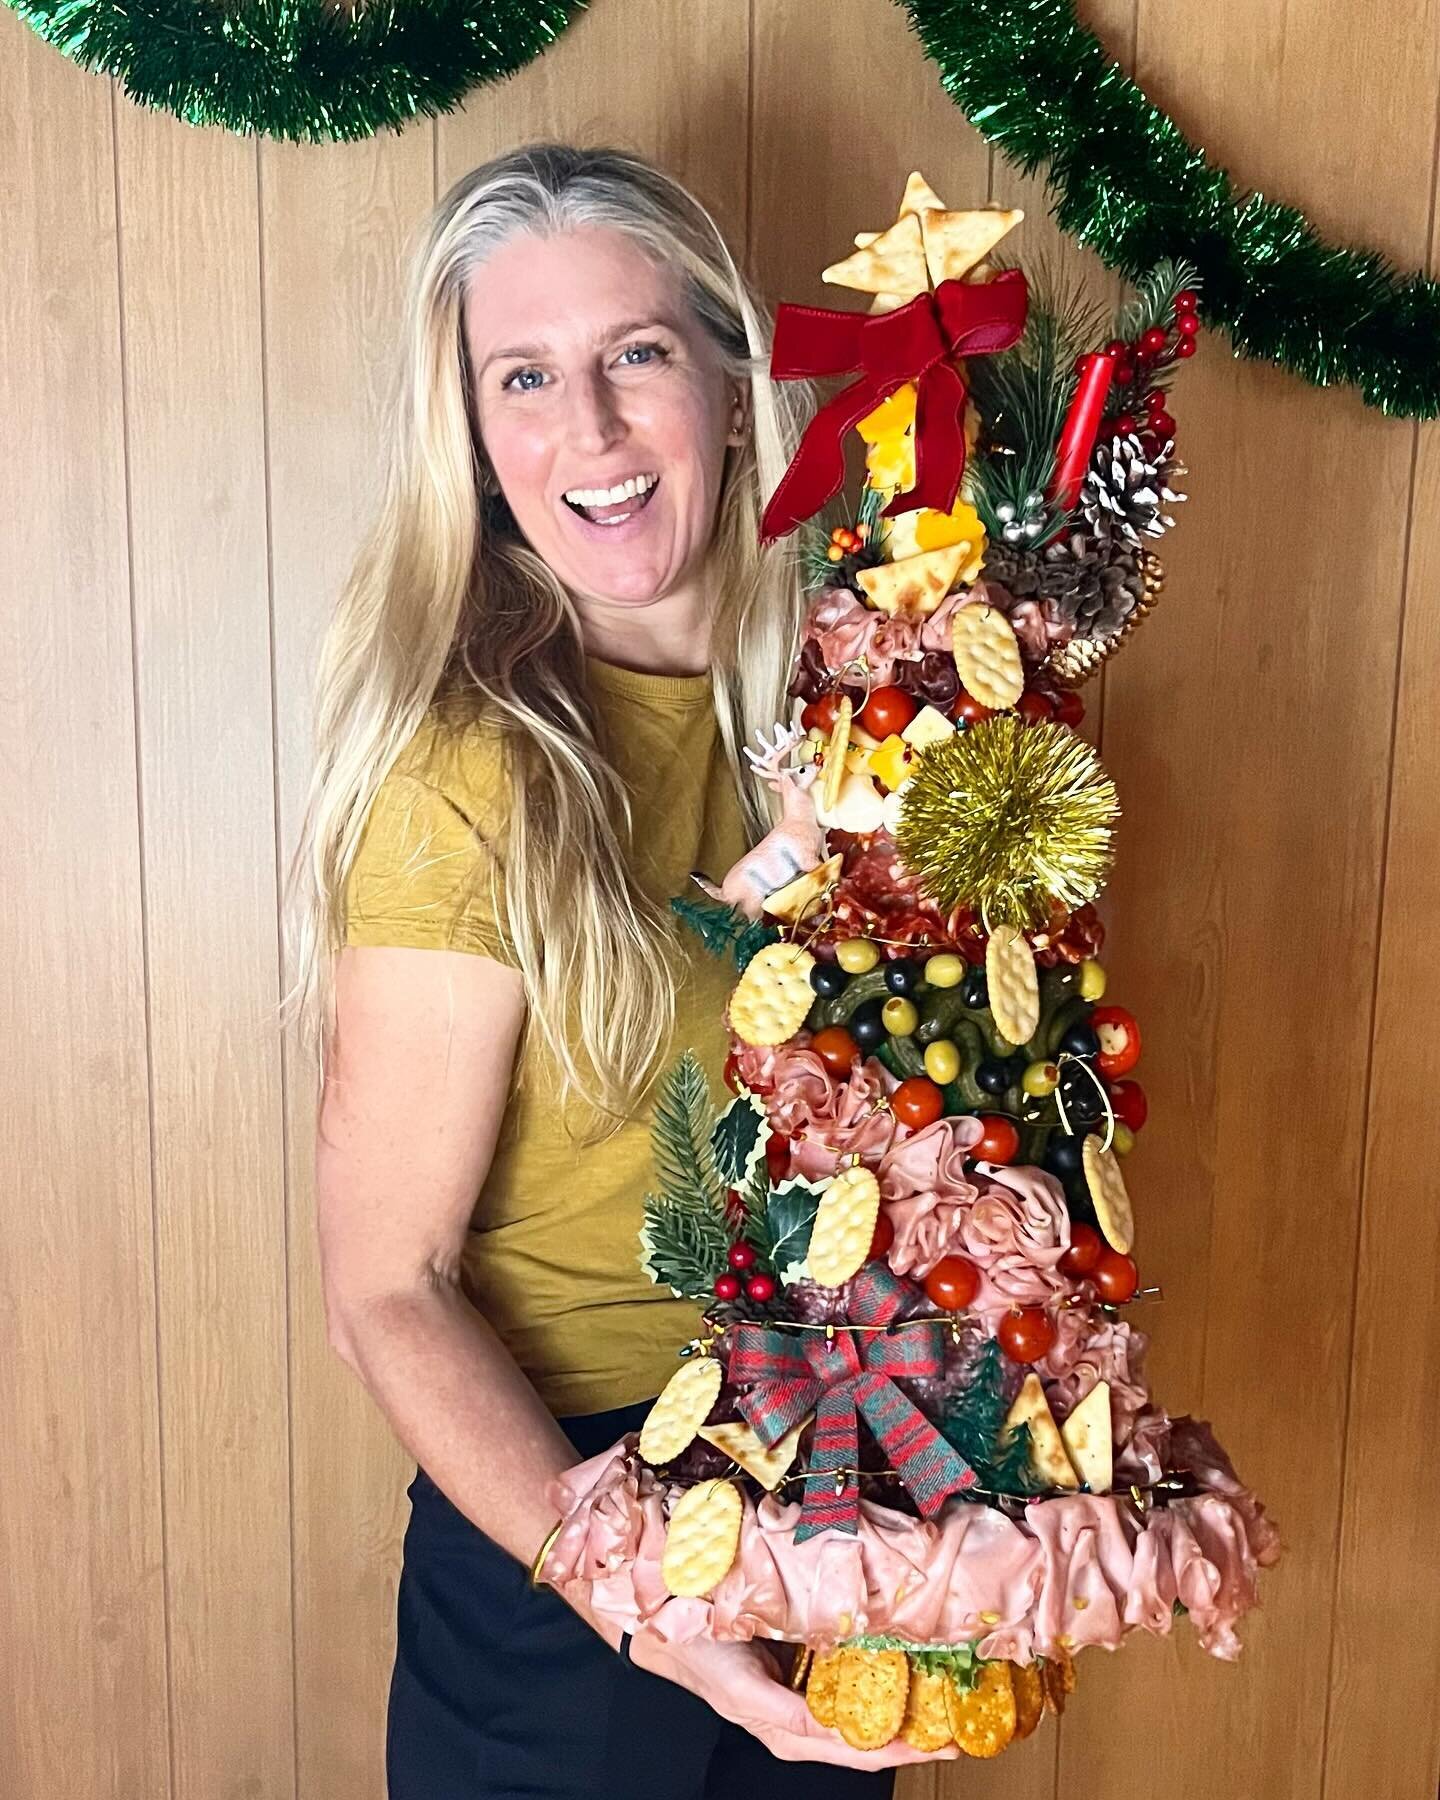 a couple of months ago I was lucky enough to have the Queen of Vintage Food @jelloandcasseroles ask me to work on a holiday shoot with her. The vision was a Charcuterie Tree. She gave me approx 1000 lbs of deli meats and told me to let &lsquo;er rip 